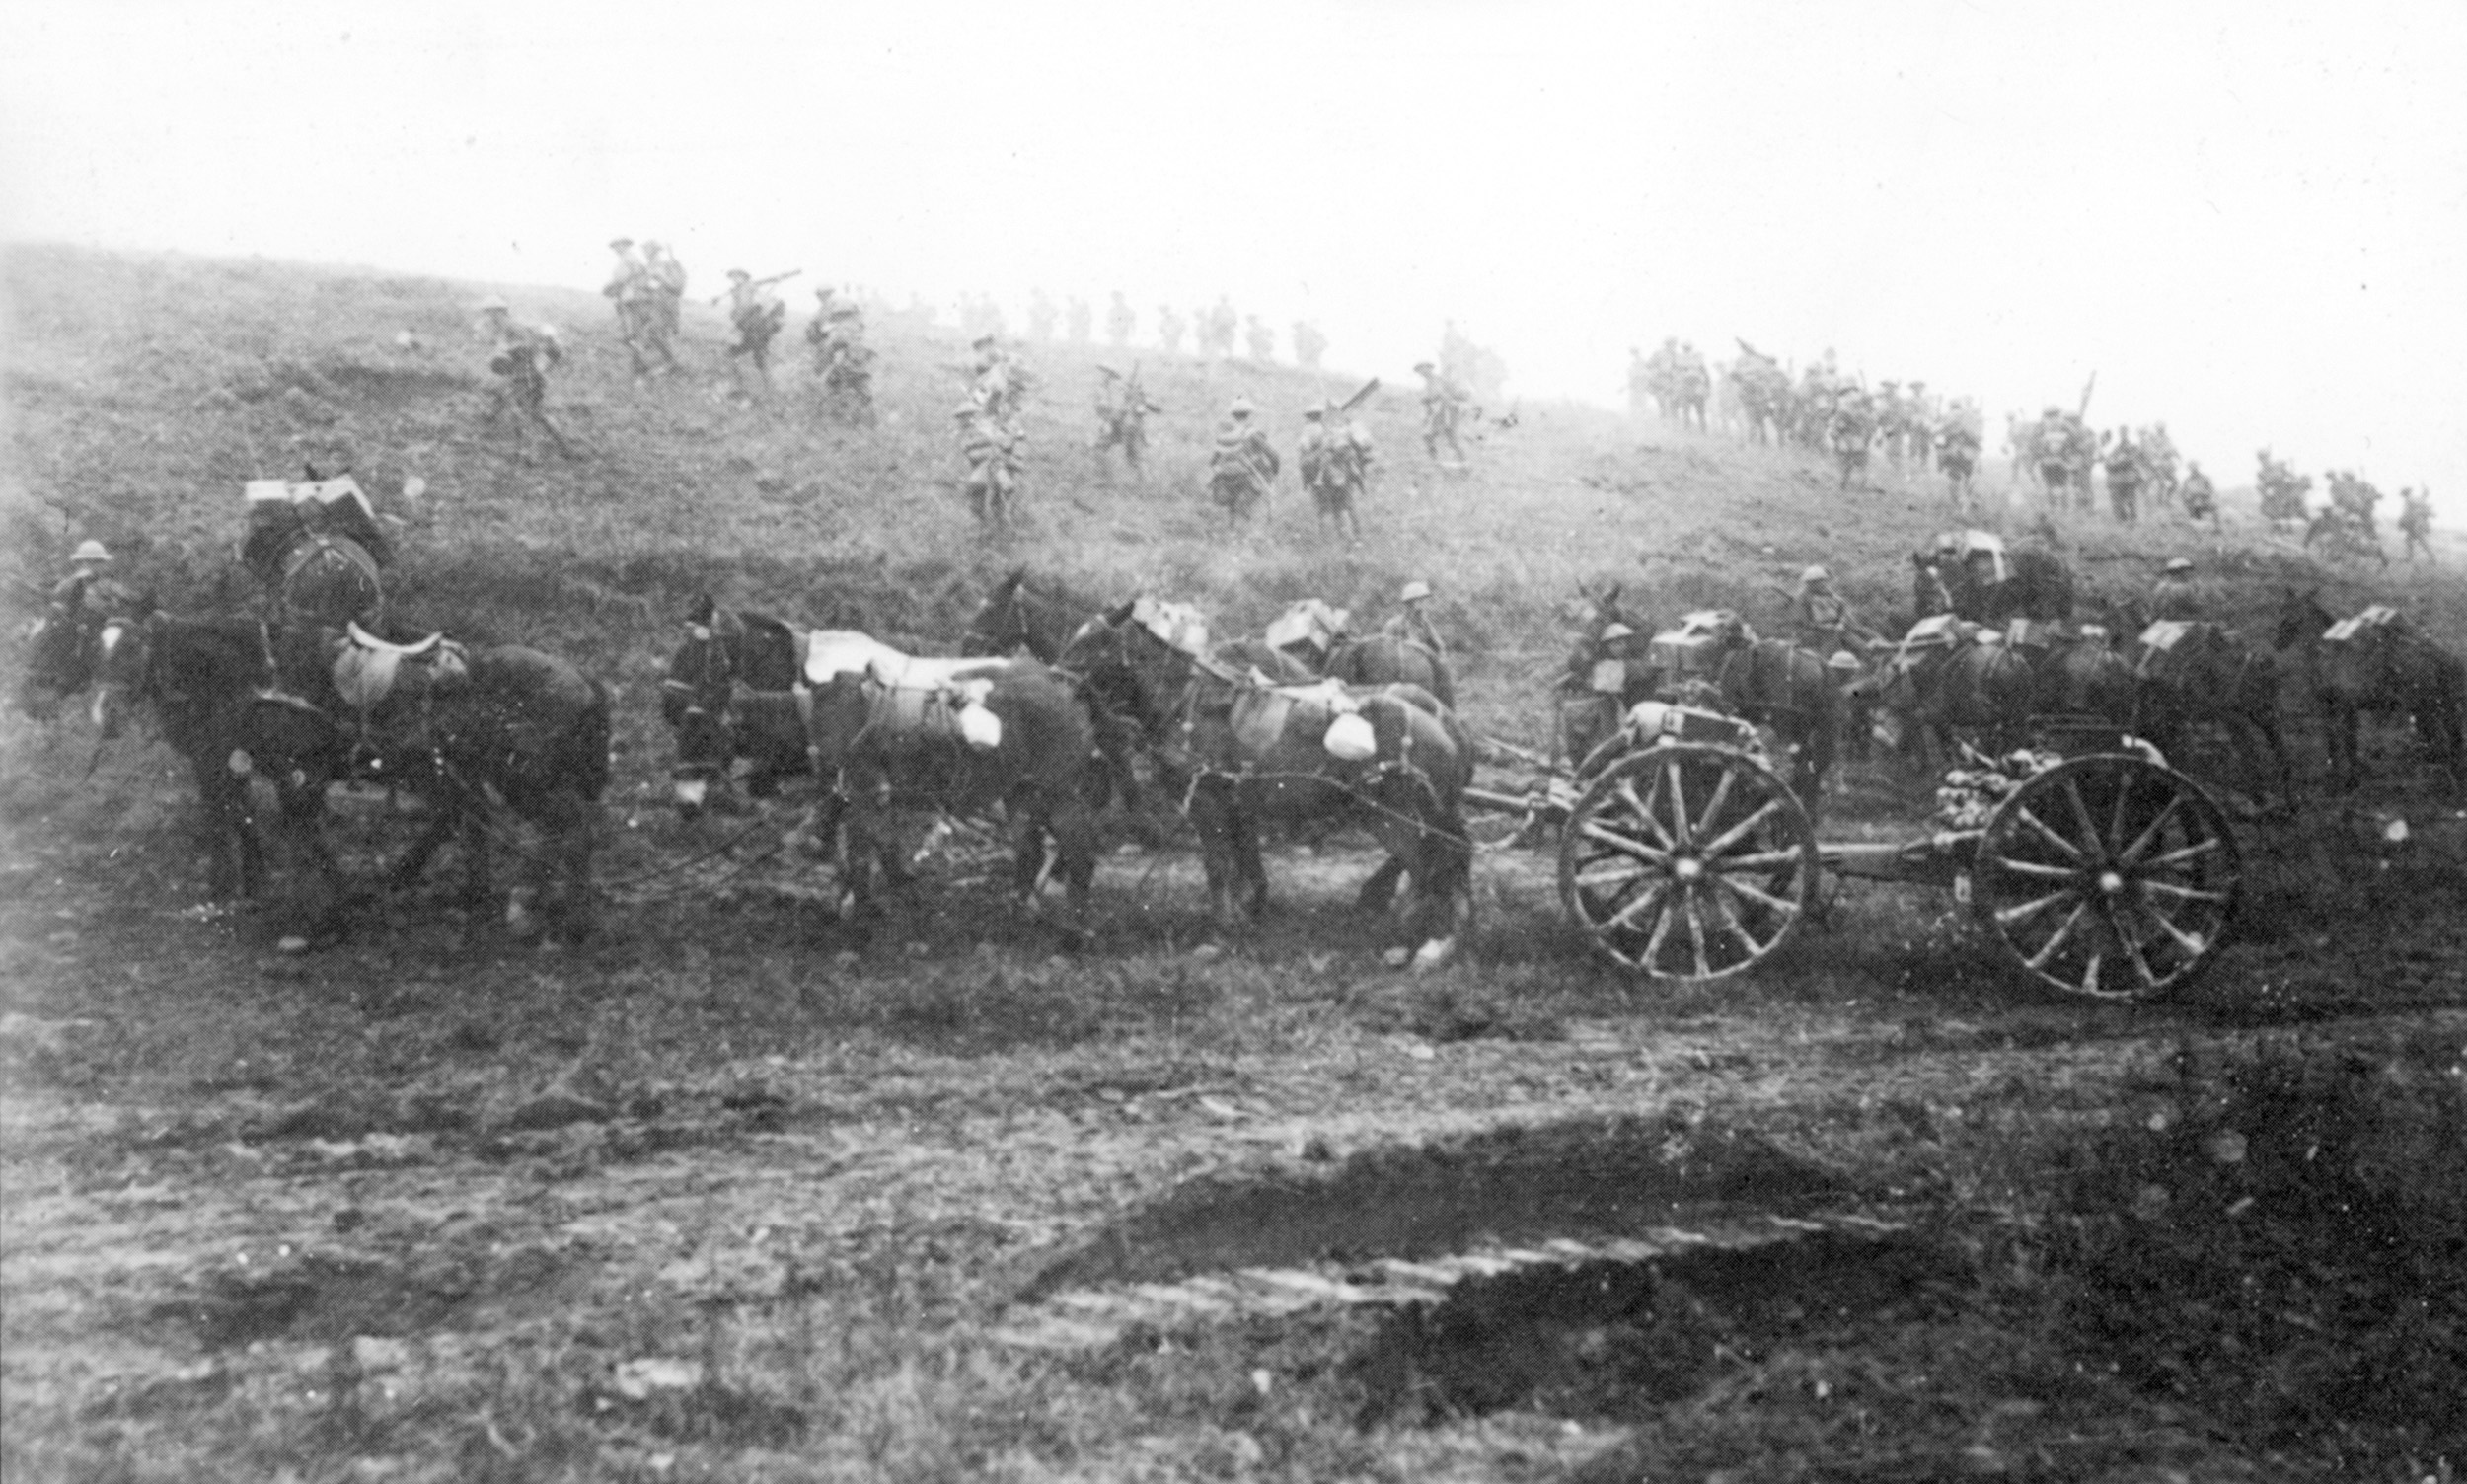 British troops advance up a hill; they often outdistanced their field artillery.